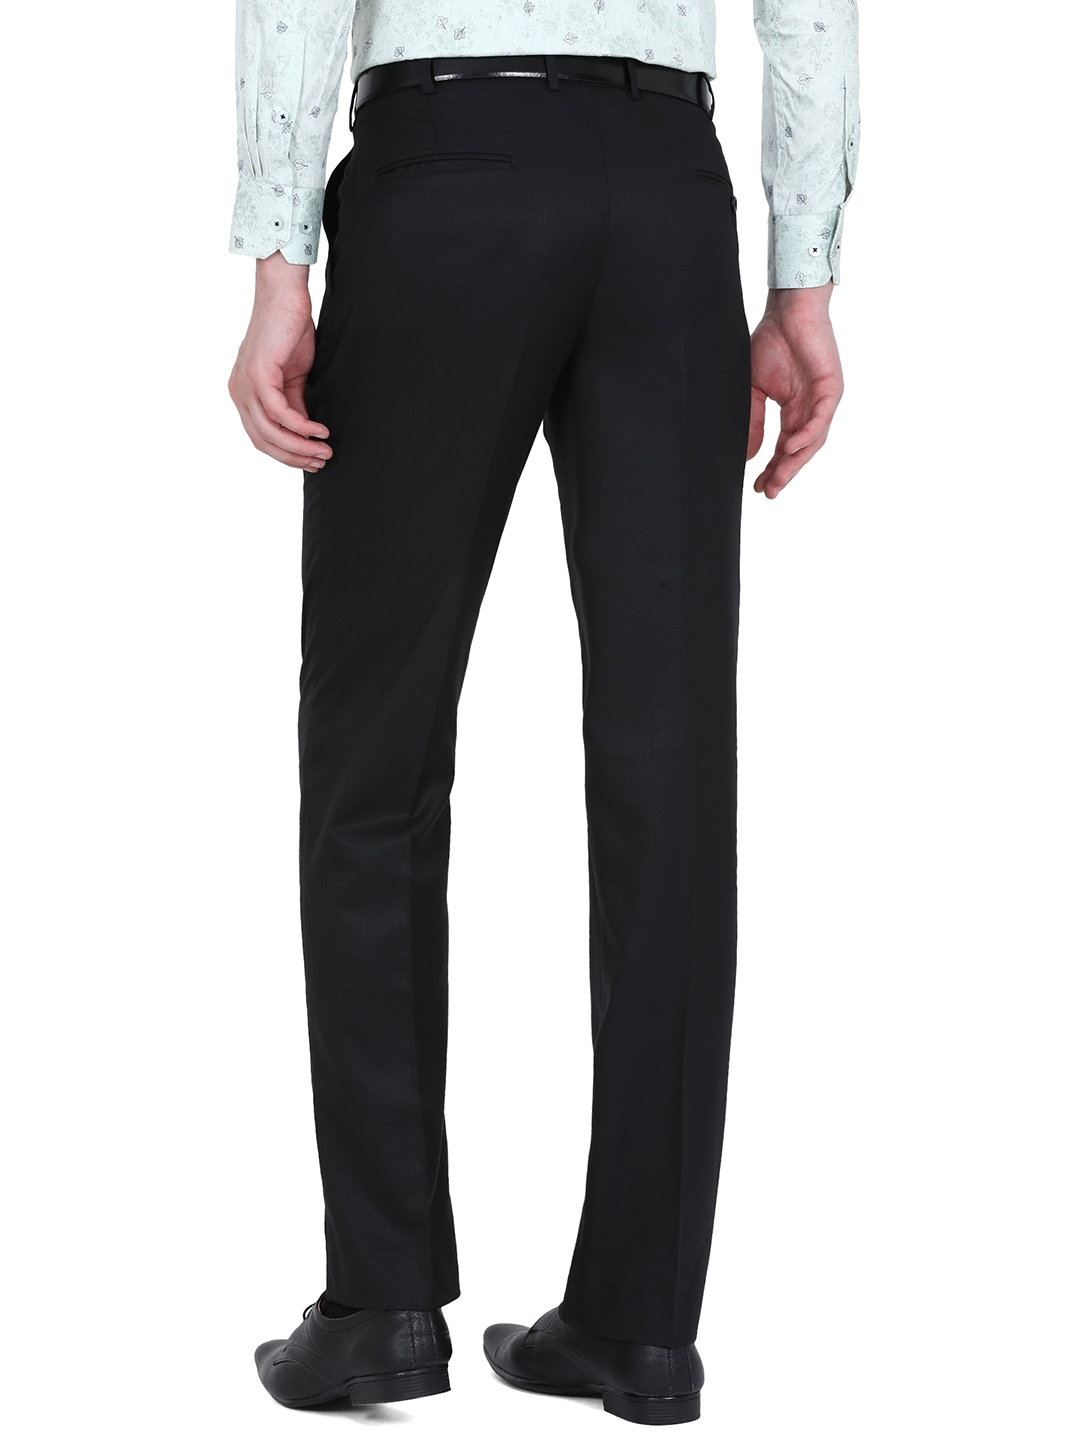 Greenfibre | Black Solid Classic fit Formal Trouser | Greenfibre 2